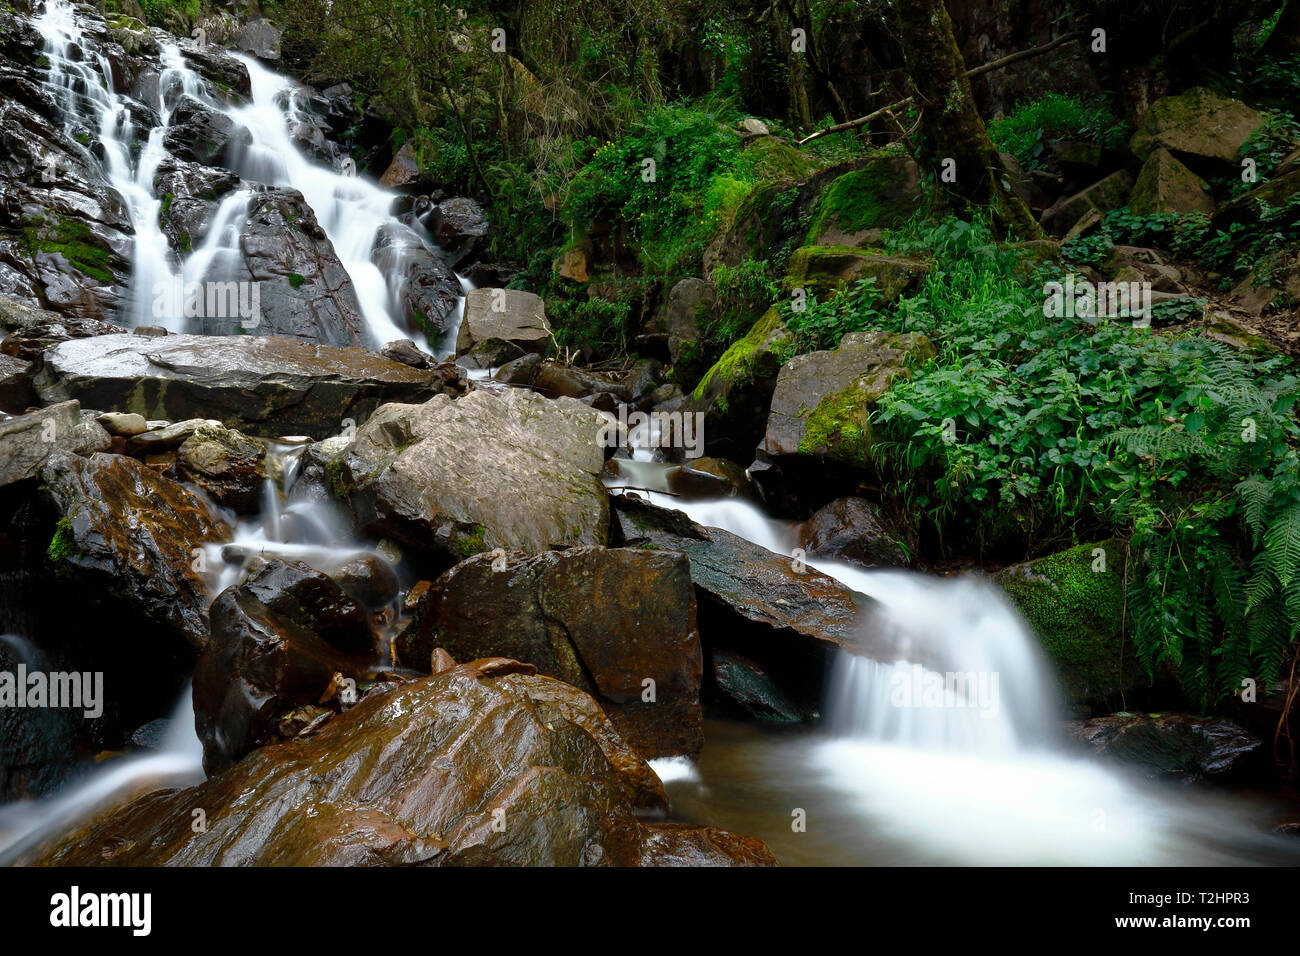 Beautiful natural water fall into the interior of andean forest in a stream called Miraflores located in the mountains. Stock Photo